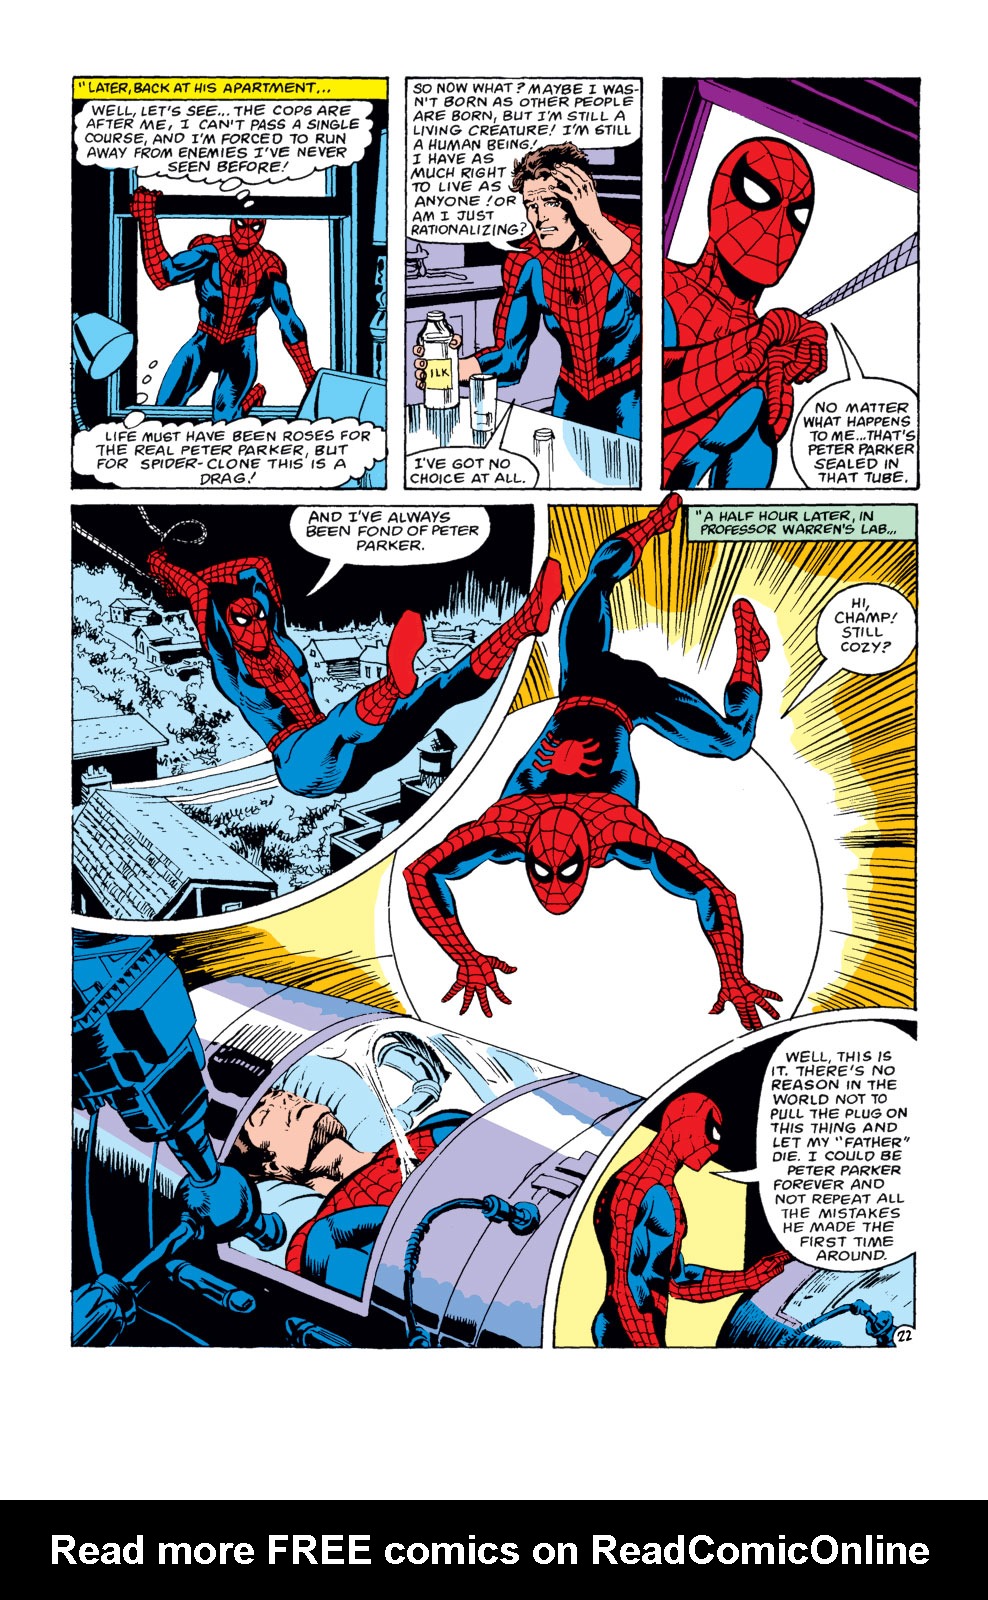 What If? (1977) issue 30 - Spider-Man's clone lived - Page 23